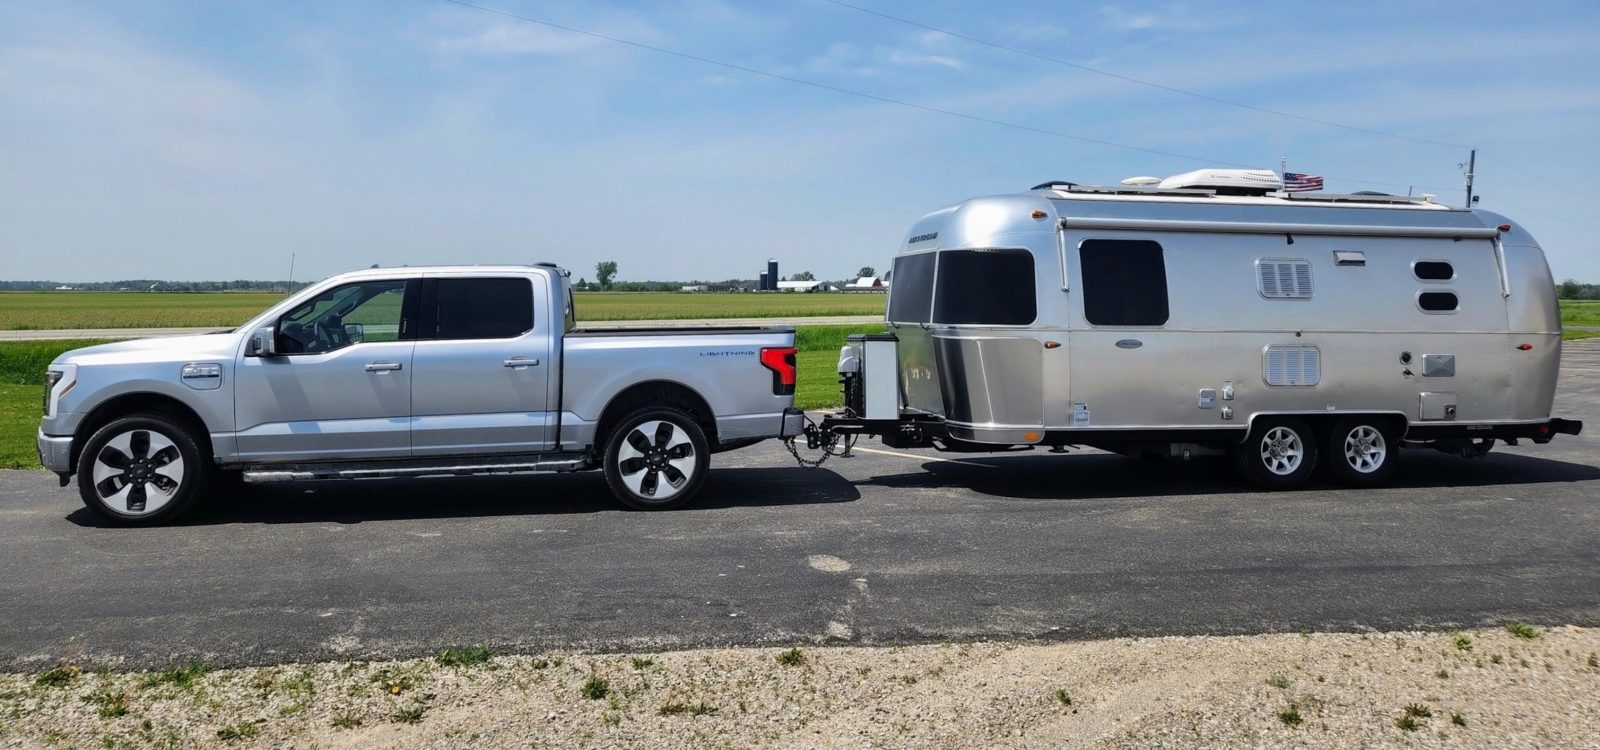 Ford F-150 Lightning tow test airstream